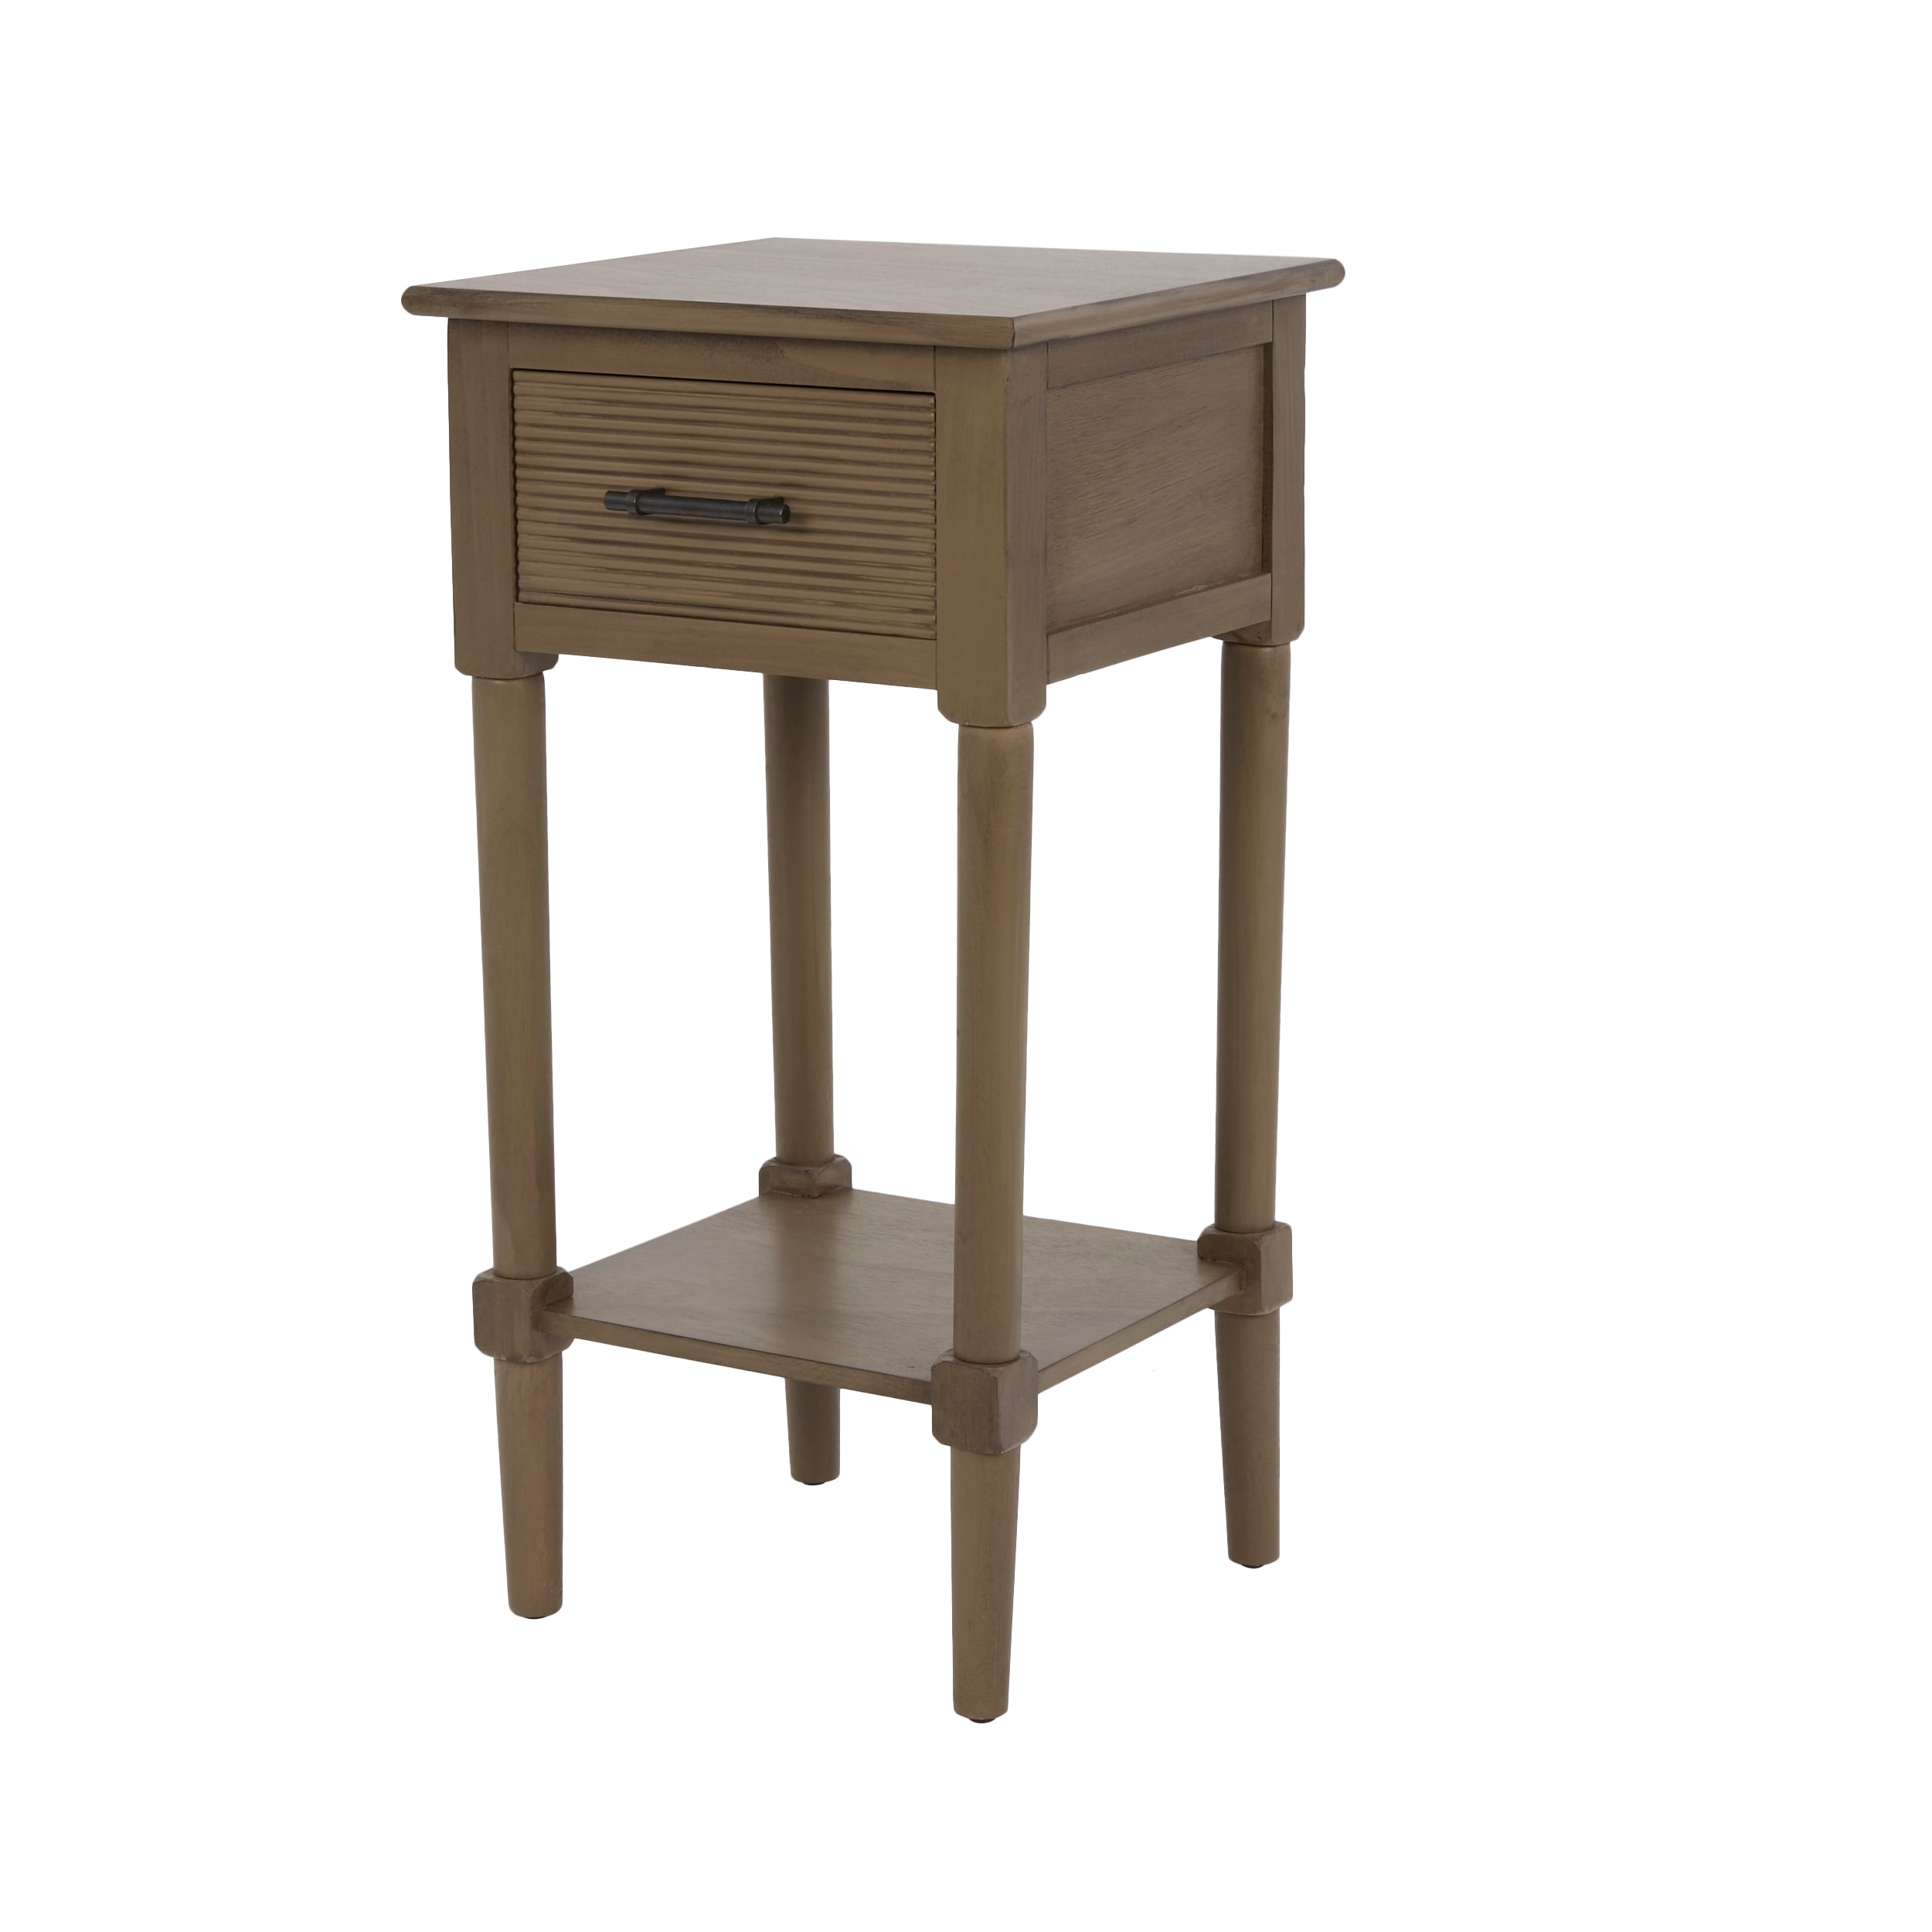 ANTIQUE NIGHTSTANDS - Painted Any Color - Re-purposed Wood Antique Furniture  - Bedside Tables - End Tables